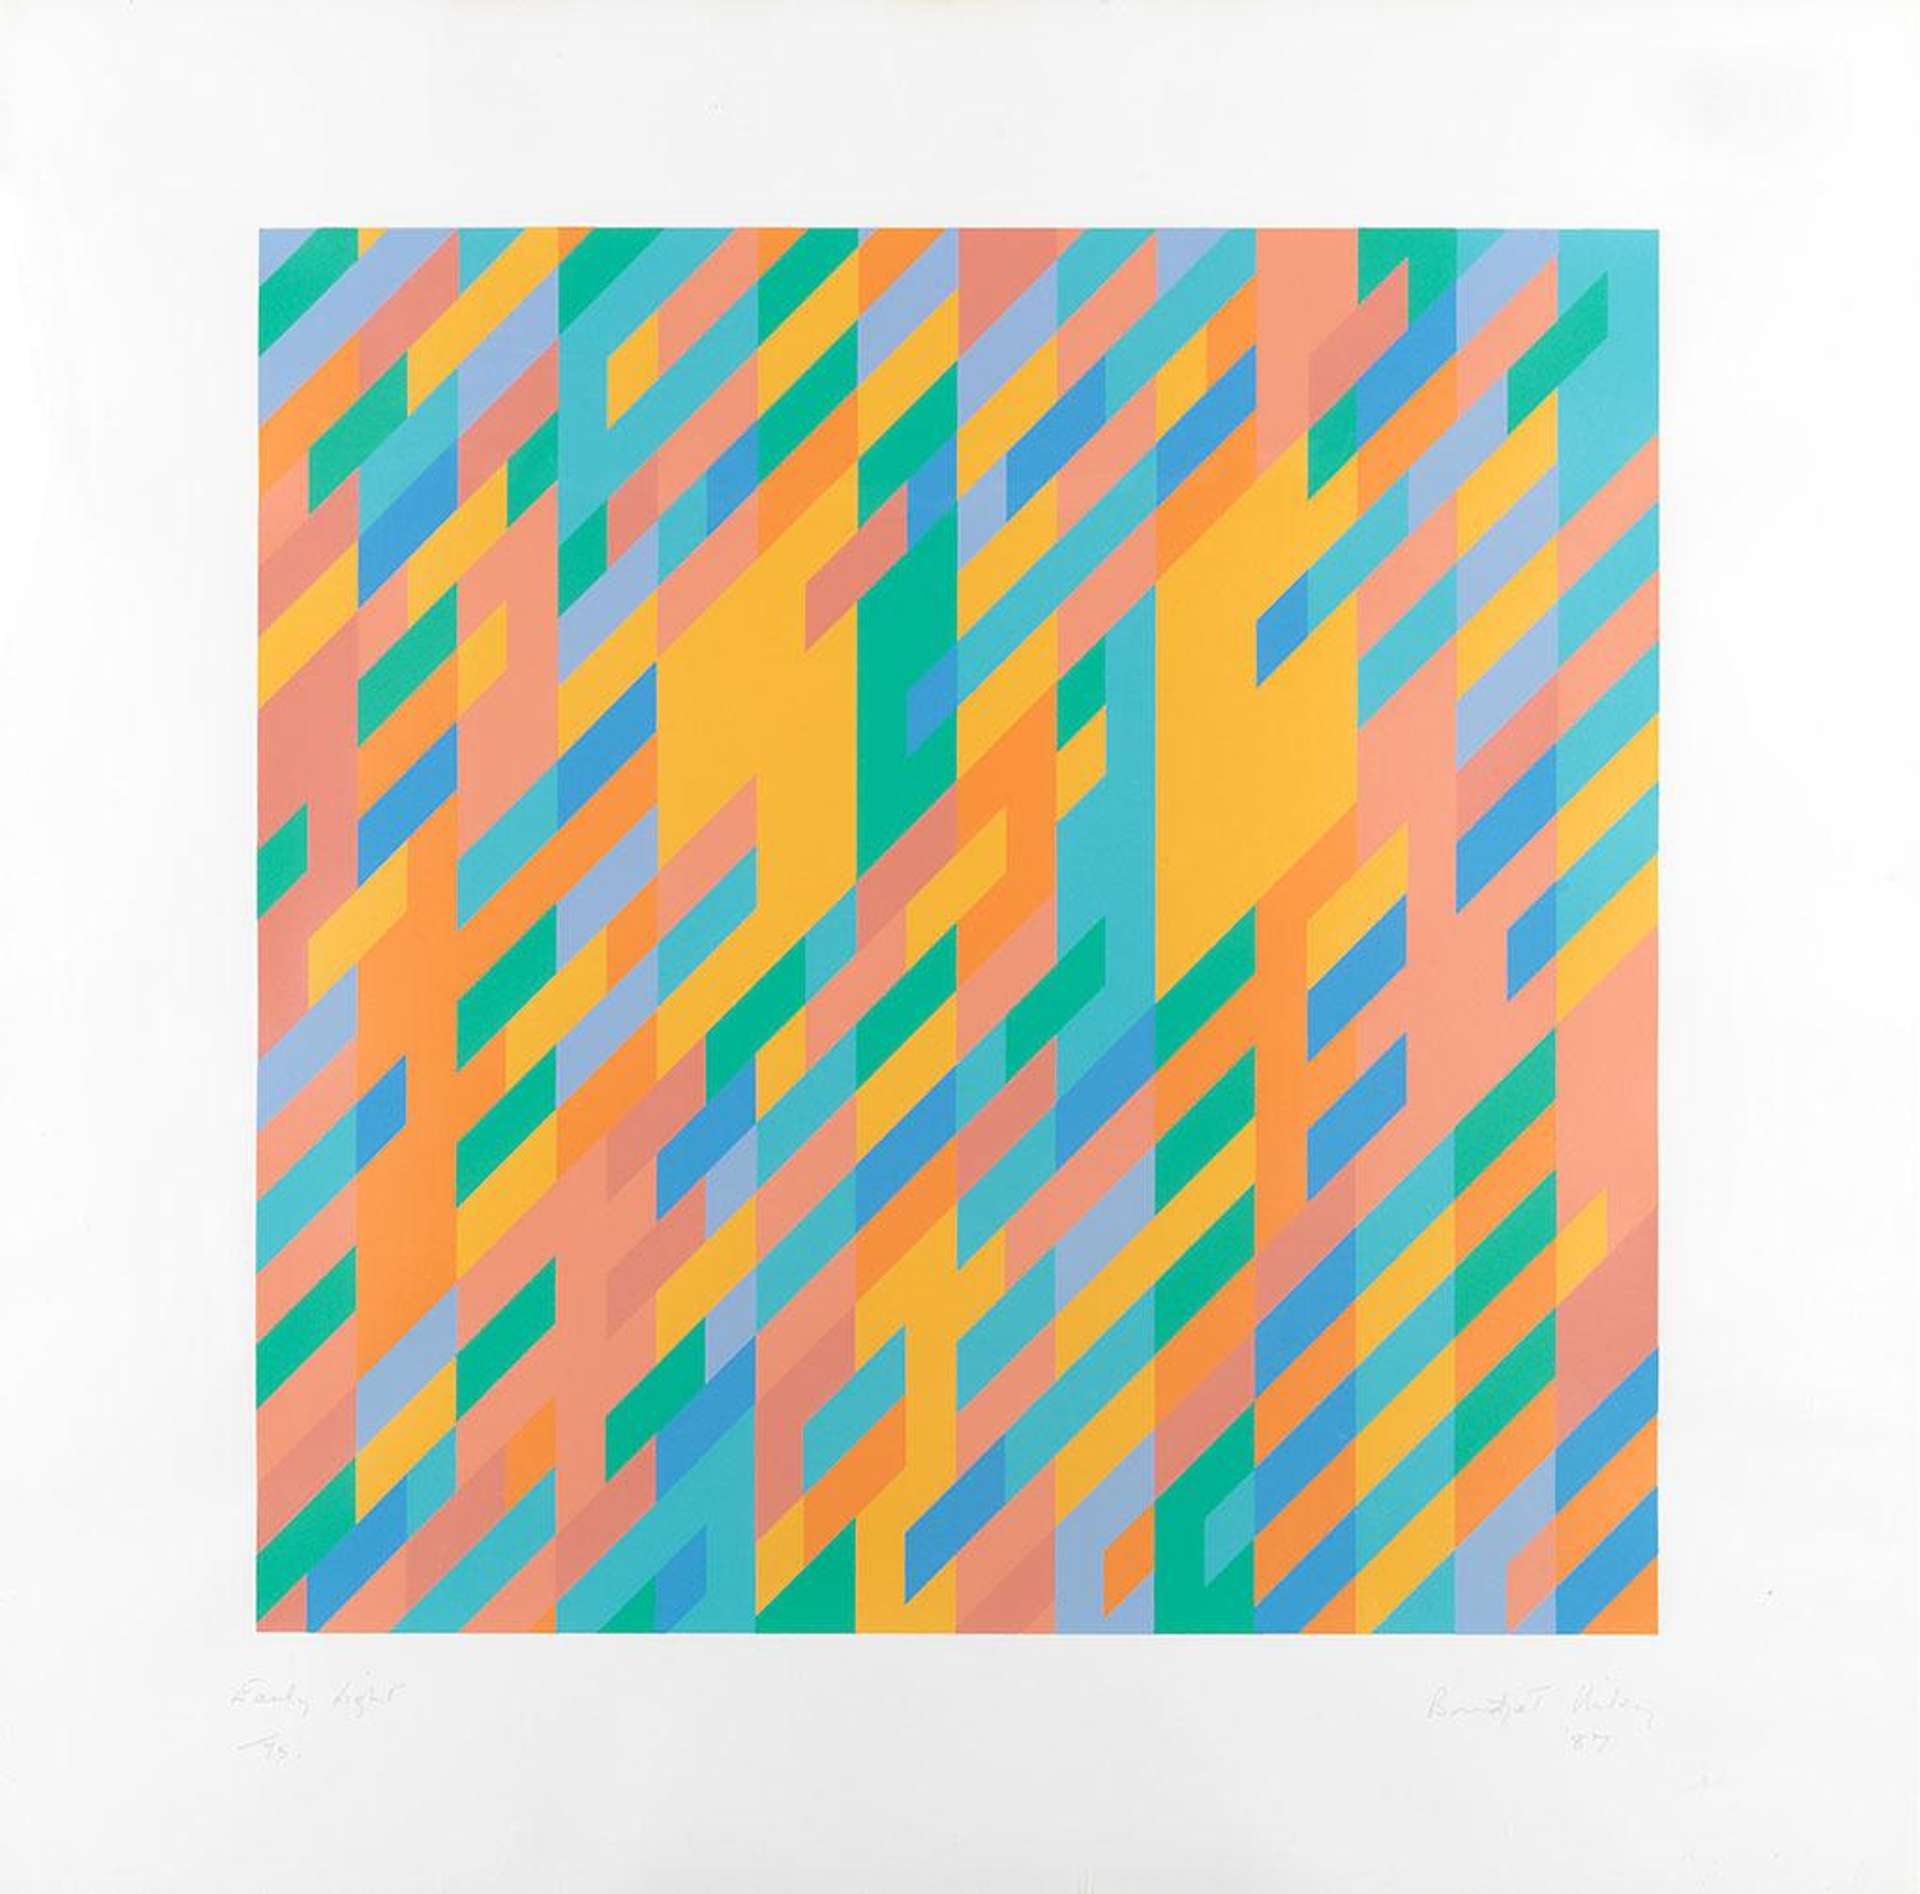 A vibrant screenprint by Bridget Riley evoking sunshine with variably sized rhomboid shapes.